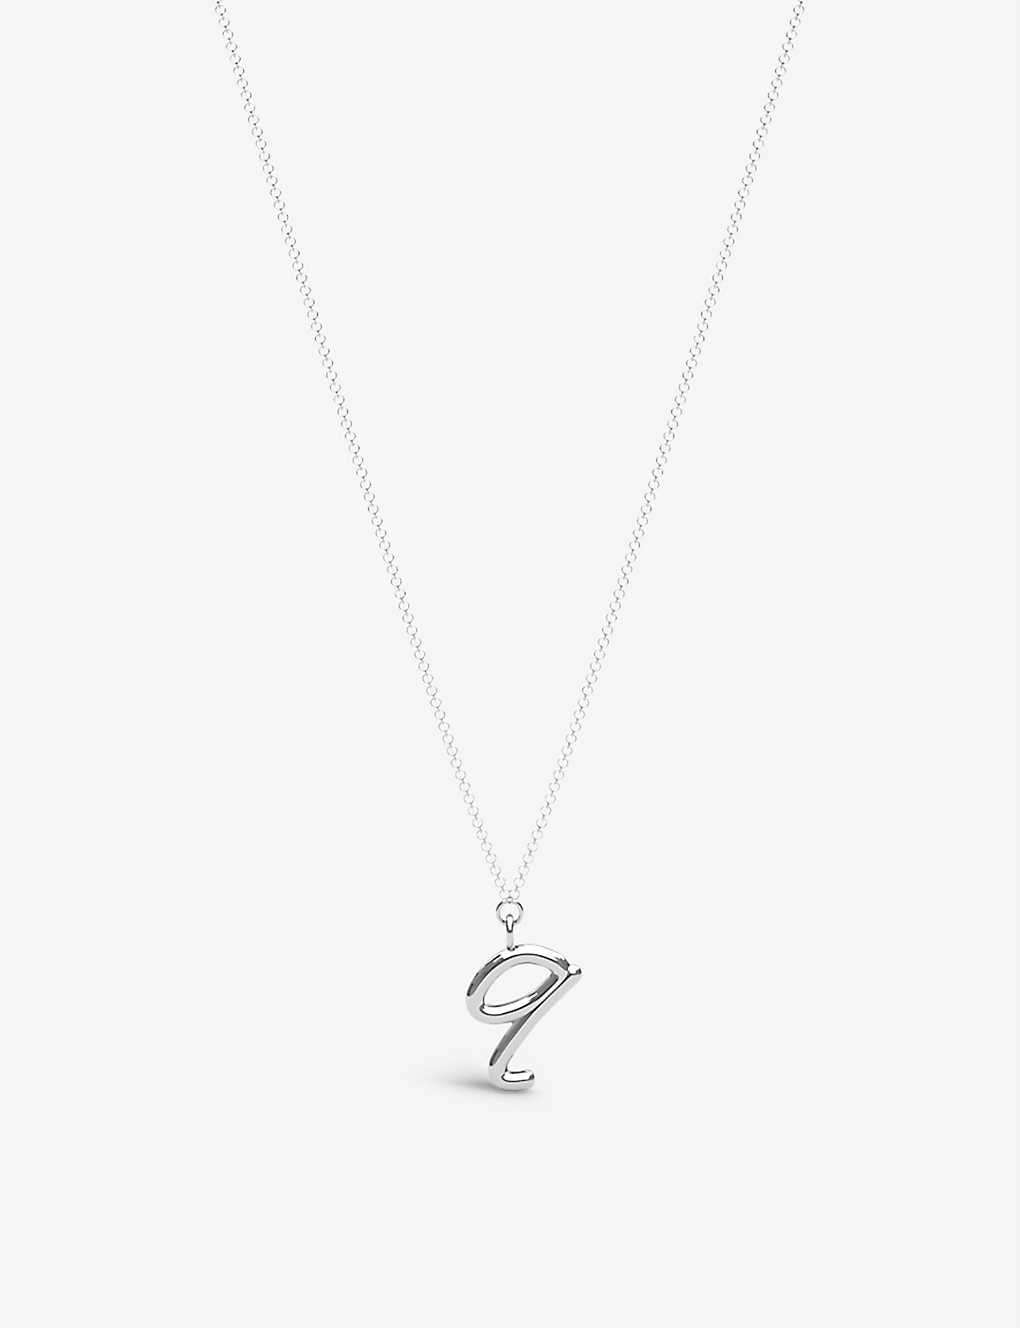 The Alkemistry Womens 18ct White Gold Love Letter Q Initial 18ct White-gold Pendant Necklace